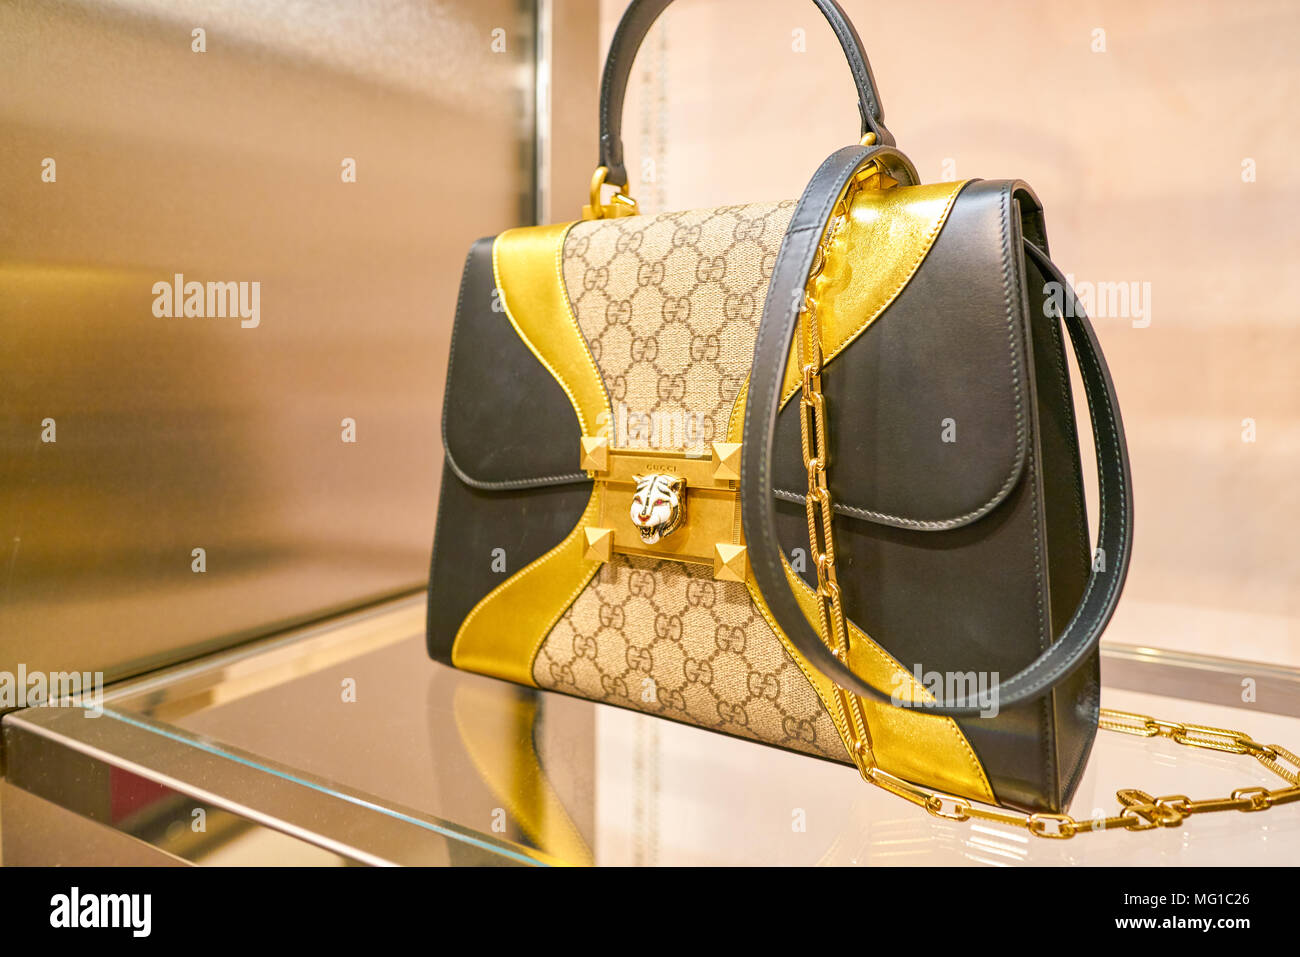 MILAN, ITALY - CIRCA NOVEMBER, 2017: close up shot of Gucci bag on display  at Rinascente. Rinascente is a collection of high-end stores Stock Photo -  Alamy